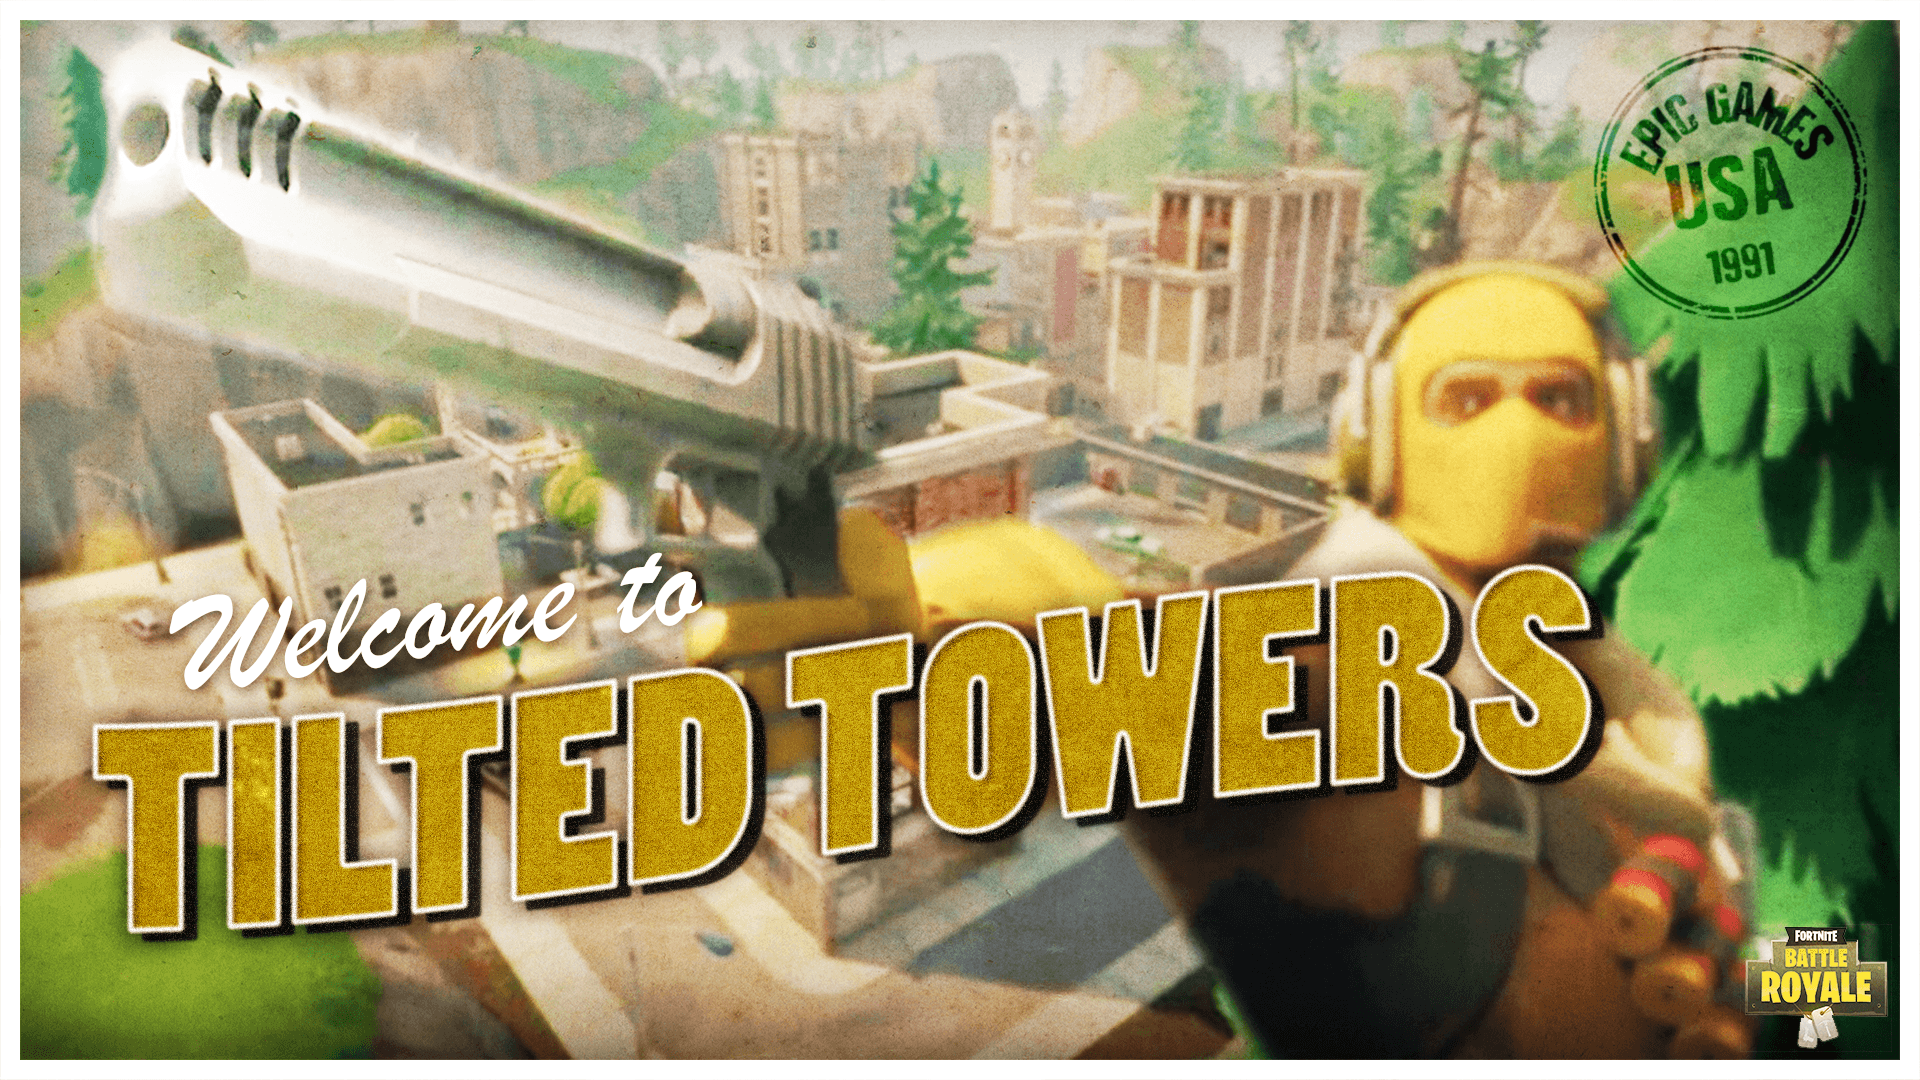 Tilted Towers Post Card wallpaper 1080p